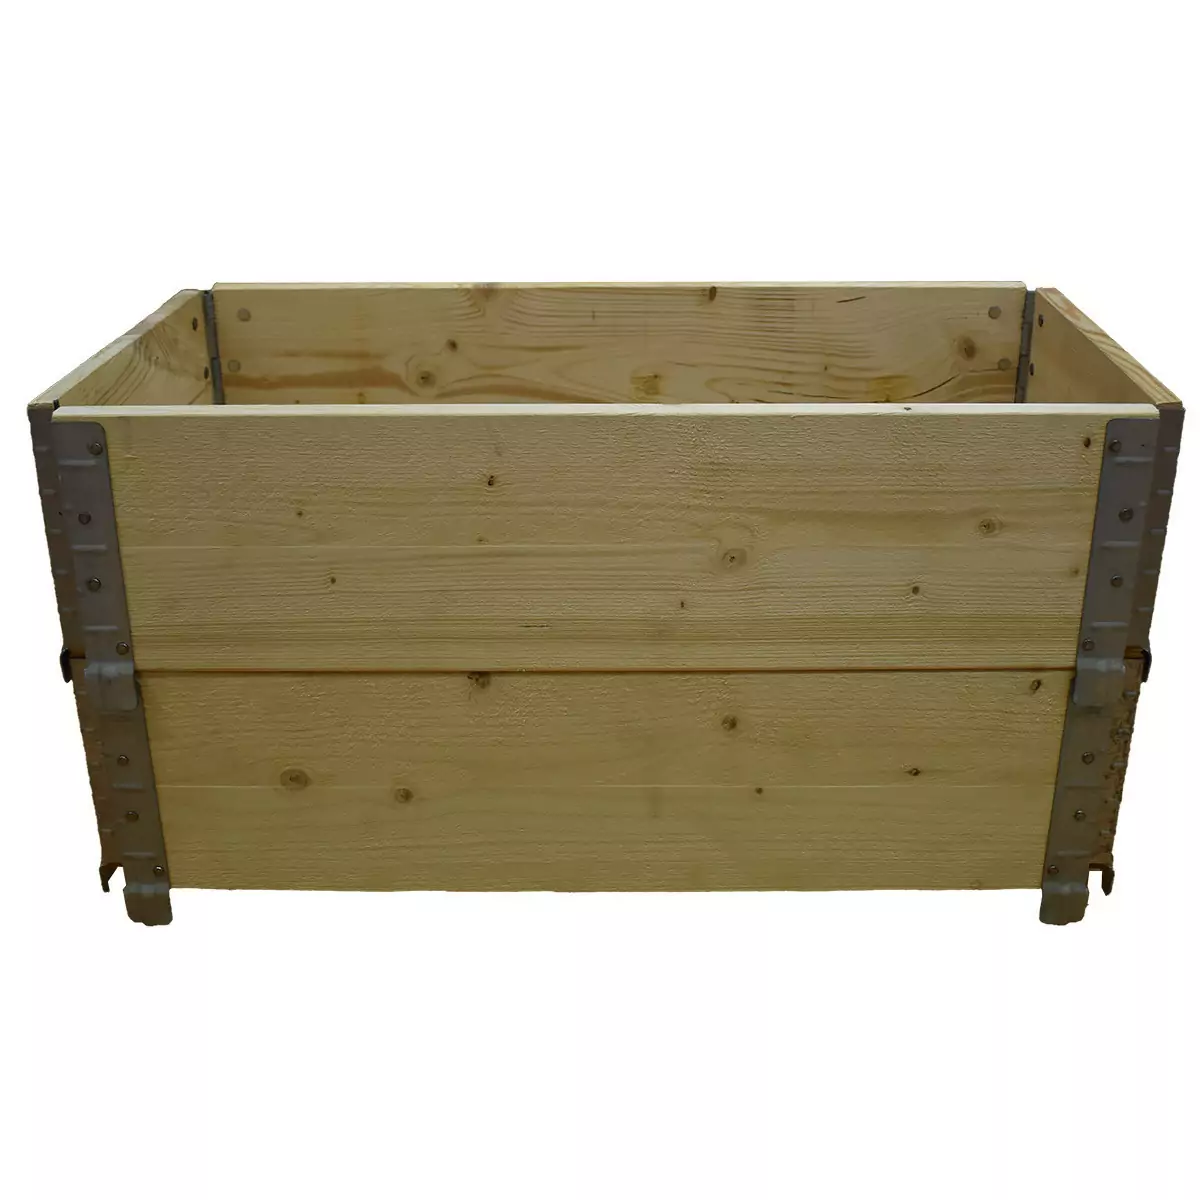 Square vegetable garden in natural wood 800x400mm